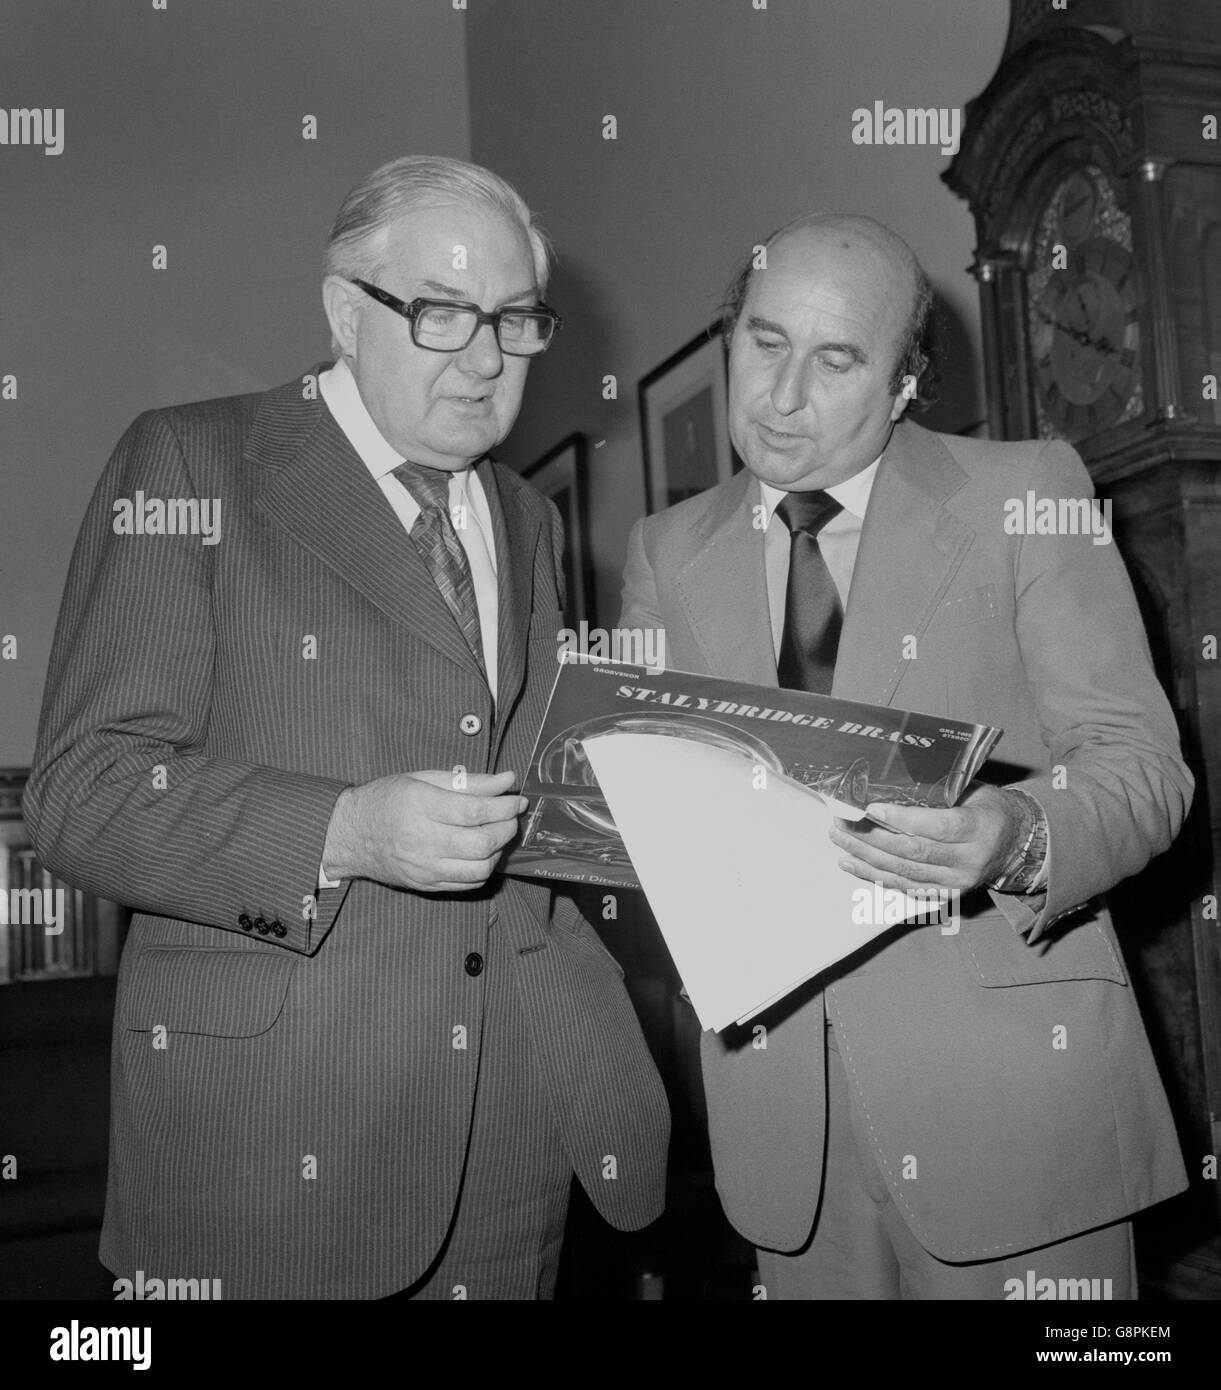 Prime Minister James Callaghan looking at the sleeve notes of an LP record, made by the Stalybridge Band after it was presented to him at the House of Commons by Tom Pendry (r), MP for Stalybridge and Hyde. Stock Photo